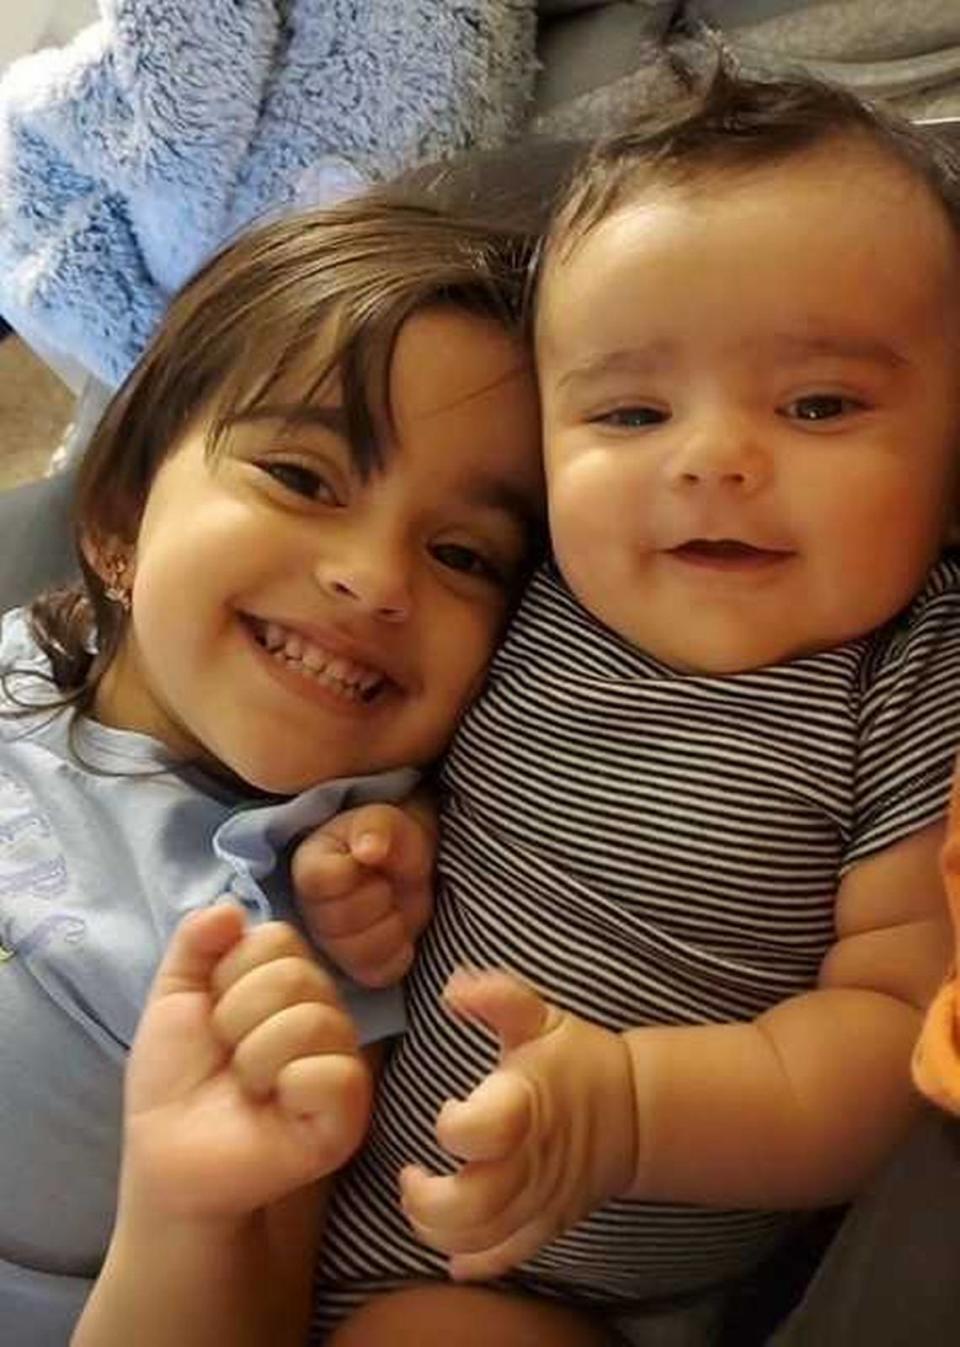 Rasul Afzili and his wife, Anila Afzili, died in a head-on vehicle crash about 11:30 p.m. Monday Feb. 15, 2021, on Jefferson Boulevard in West Sacramento, California. Their children, pictured above, 3-year-old Jannah and 7-month-old Azaan, were in the vehicle with their parents. The children were injured in the crash.